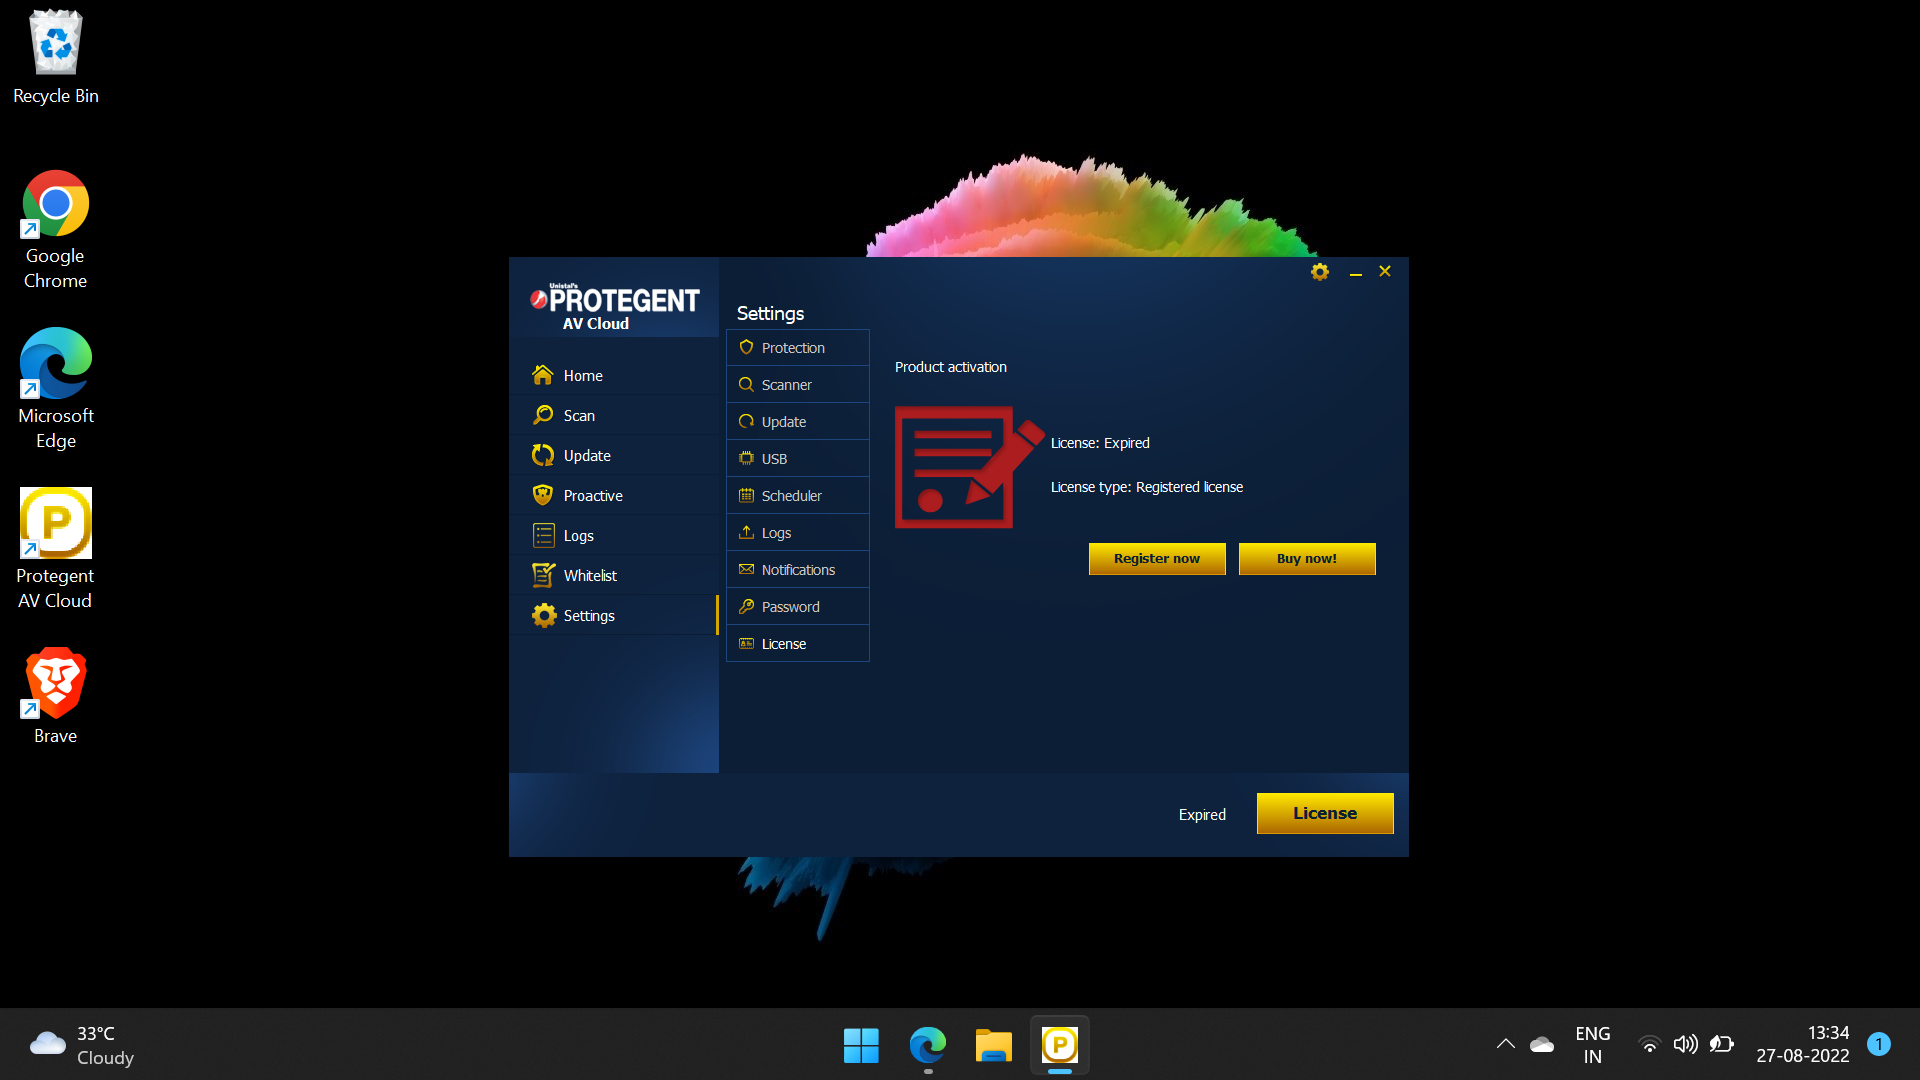 Protegent Antivirus with Data Recovery Software 10 PC/ 1 Yr. (CD